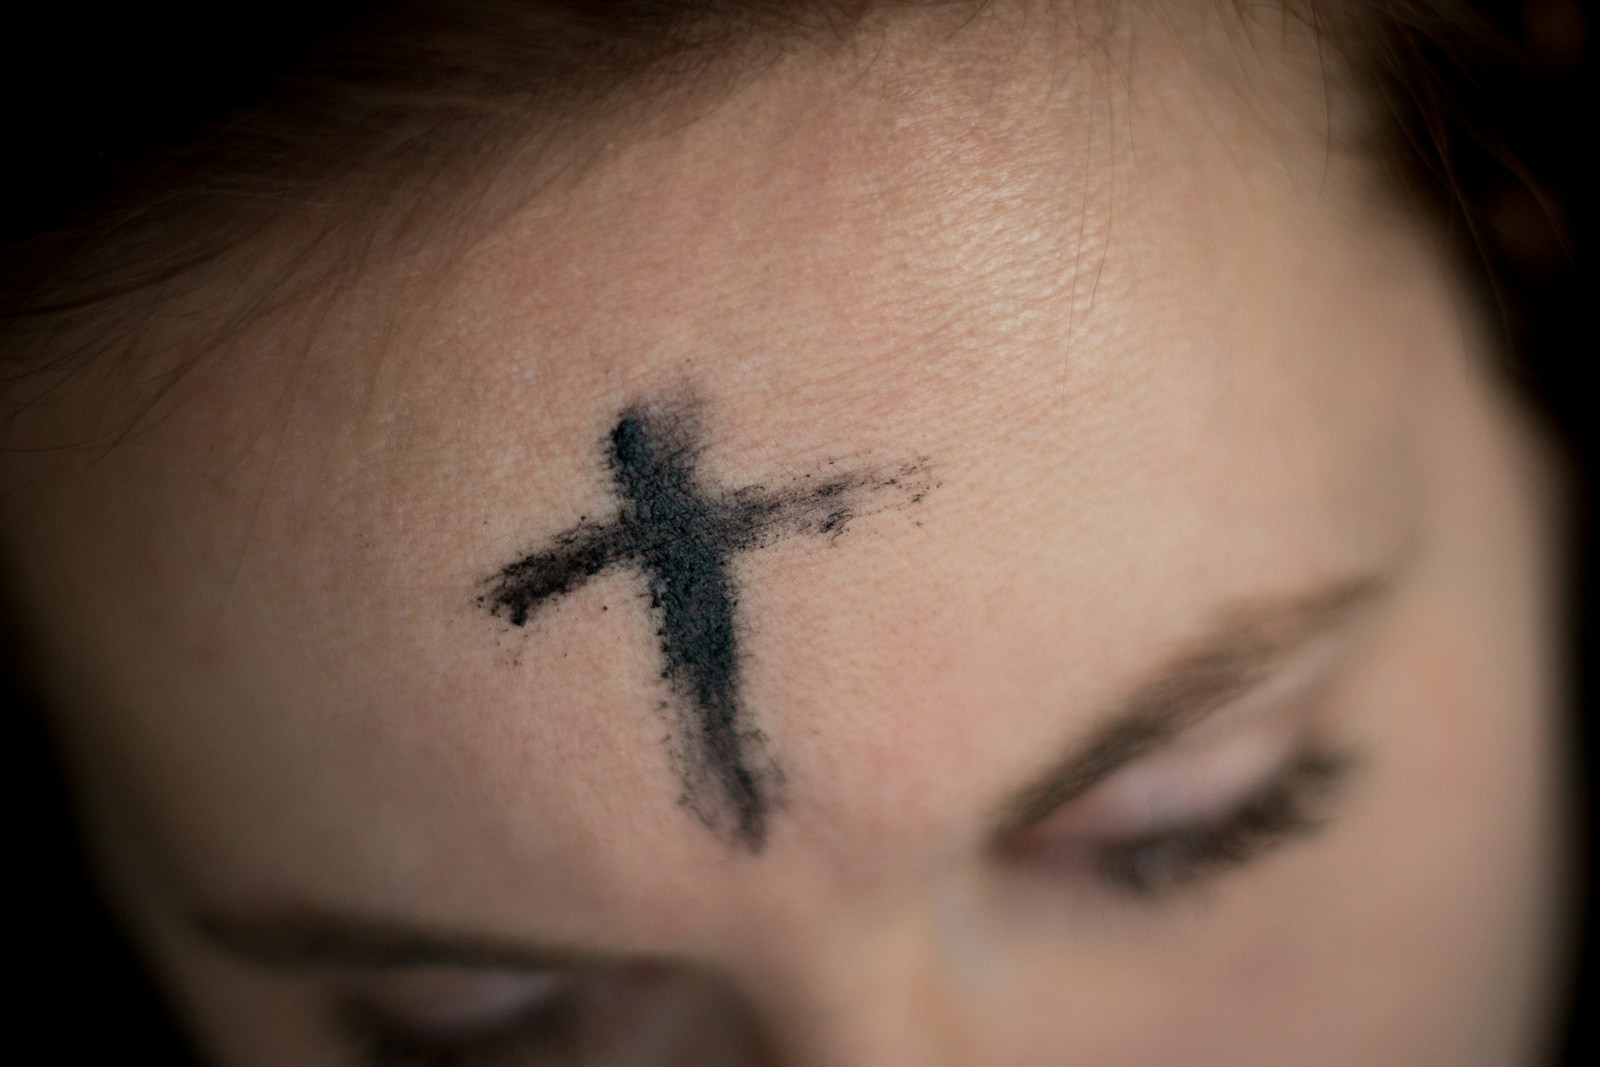 black cross on person's forehead